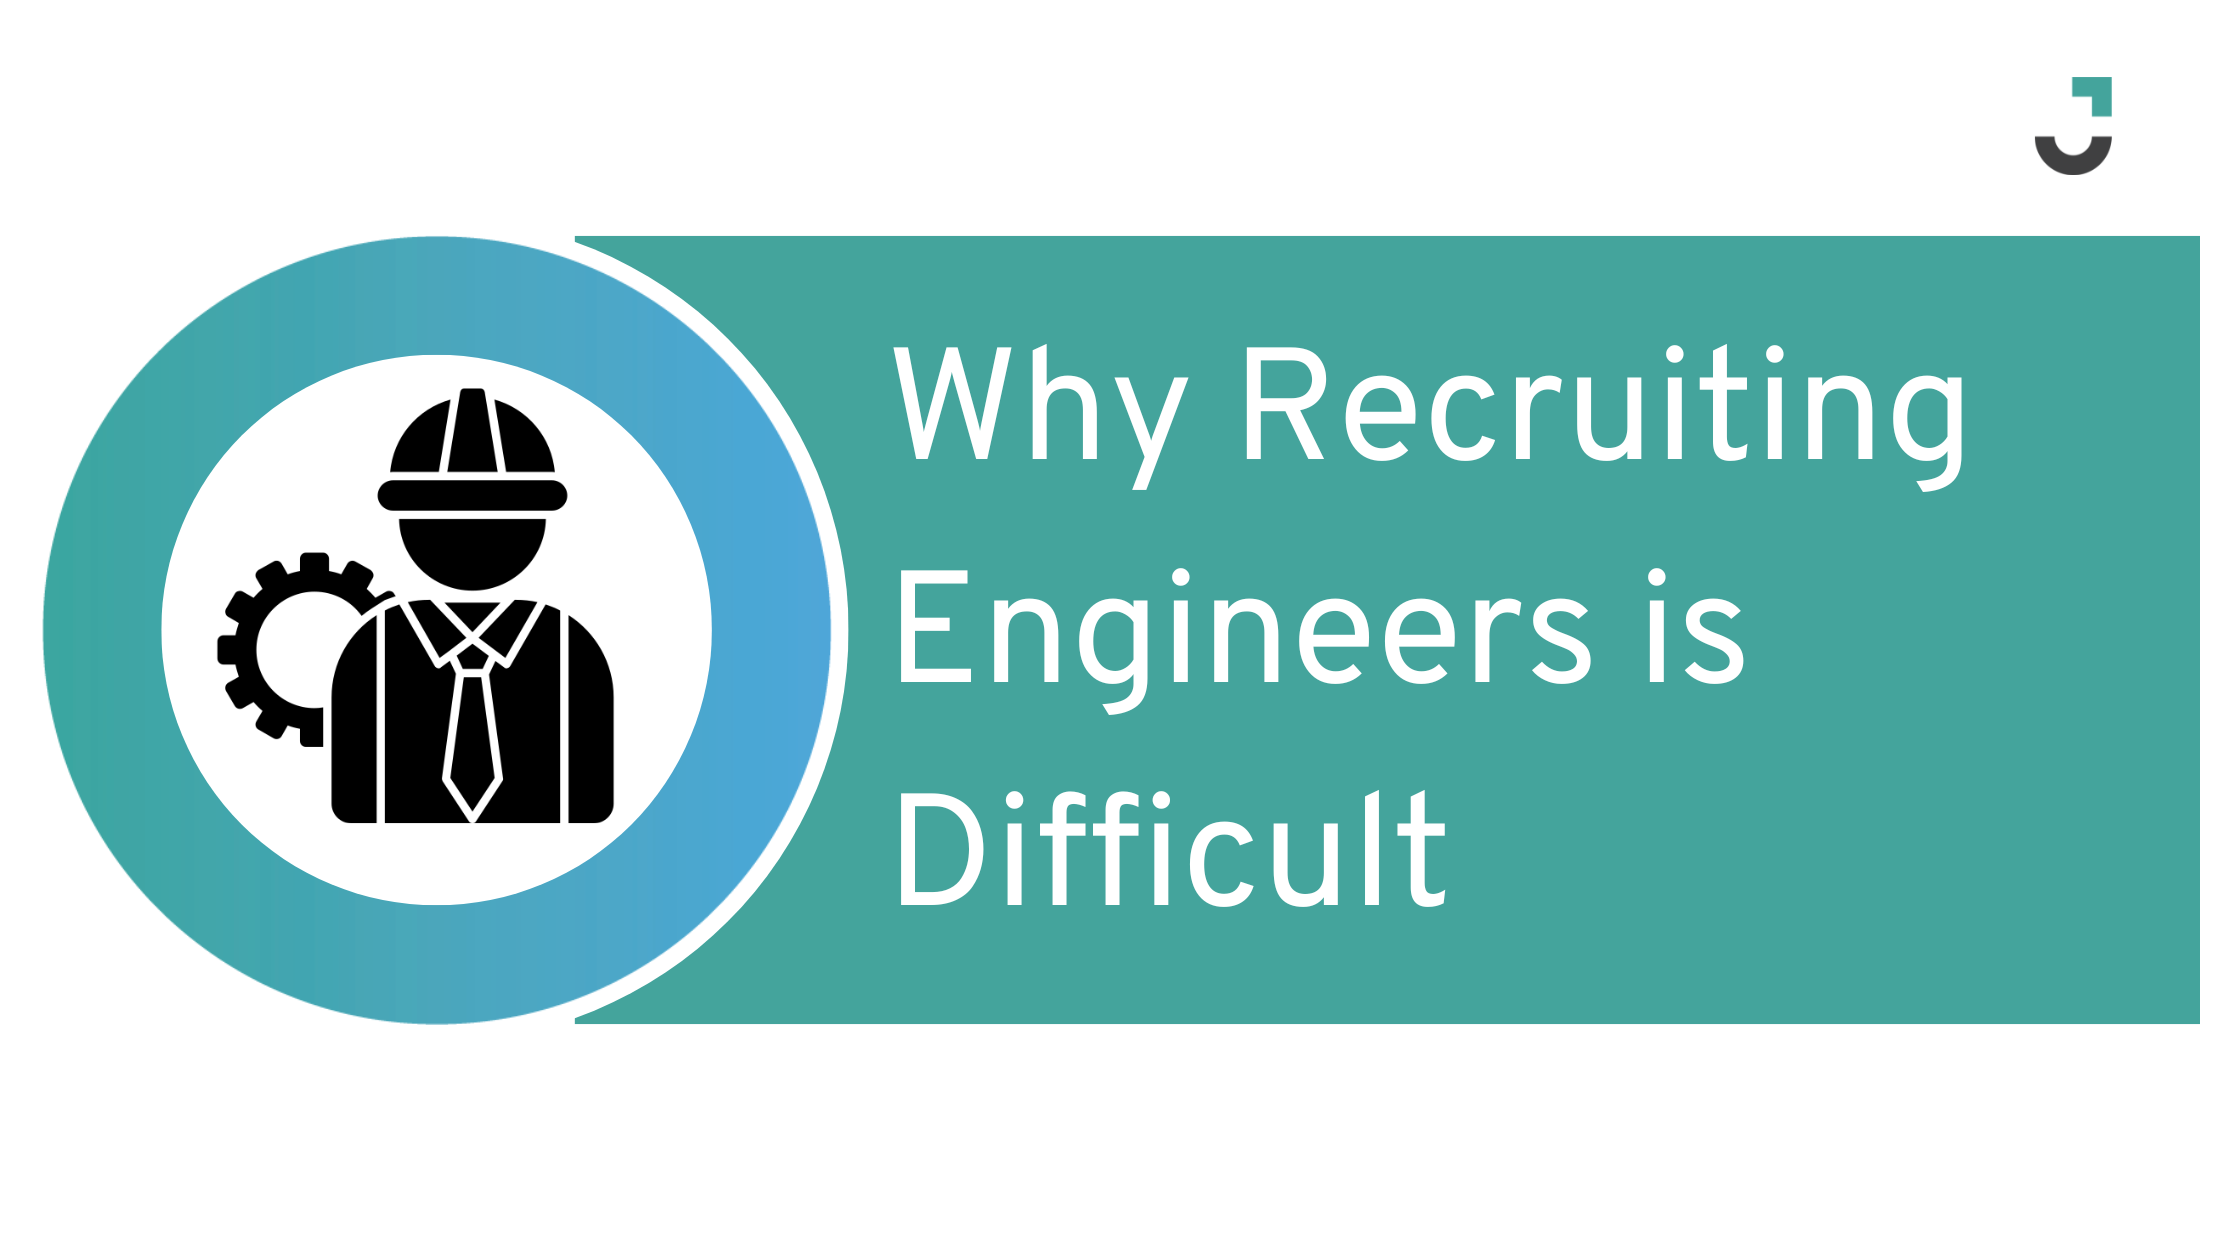 Why Recruiting Engineers is Difficult